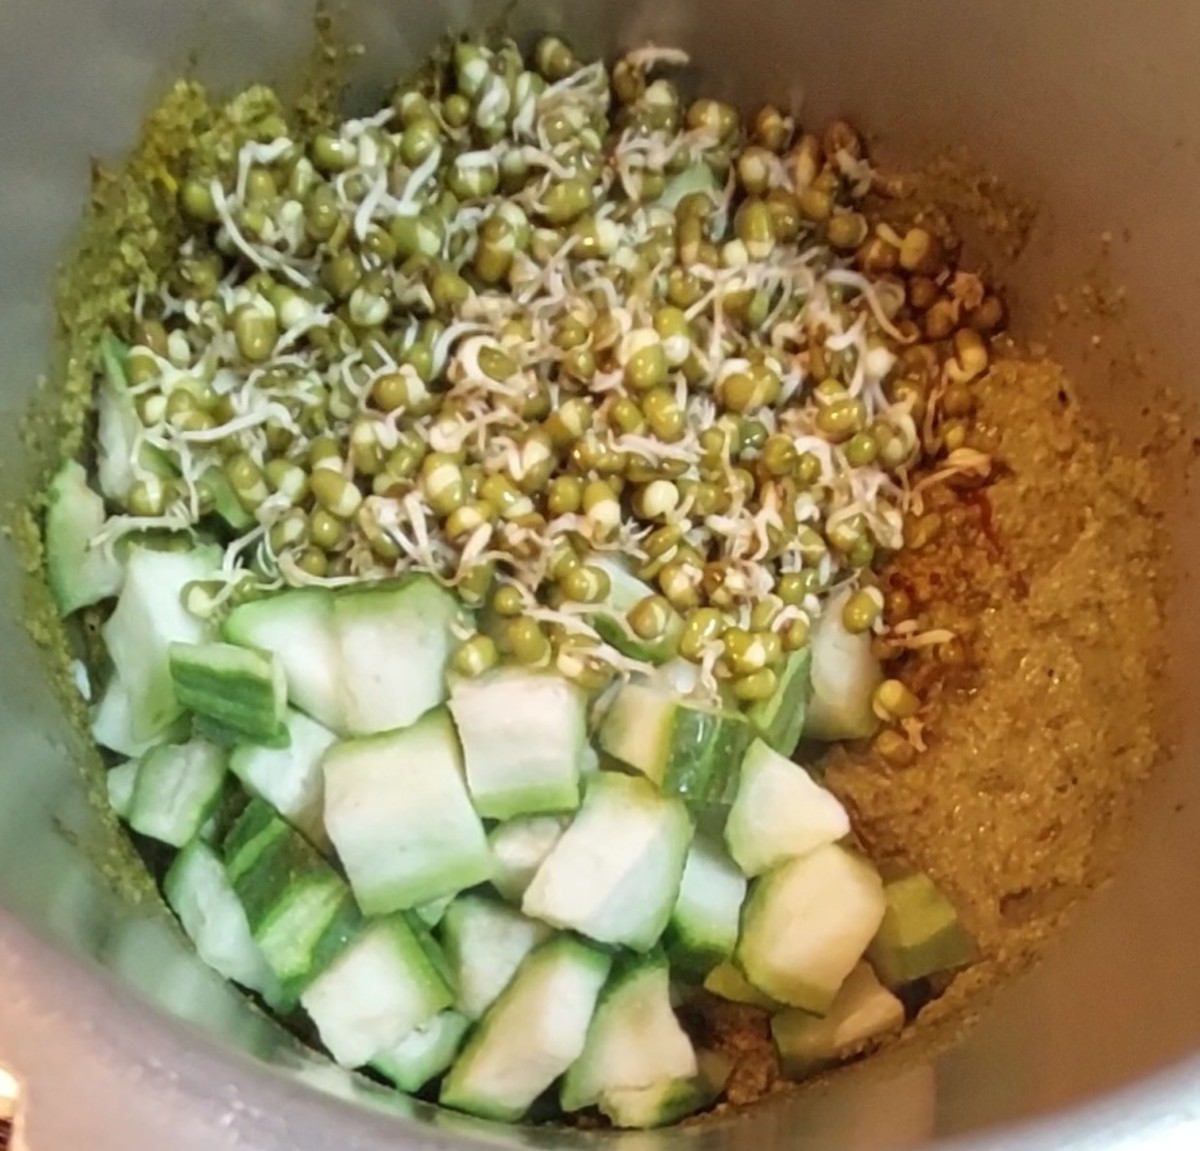 Add chopped ridge gourd and 1 cup green gram sprouts. Mix to combine with the spices and ground paste.